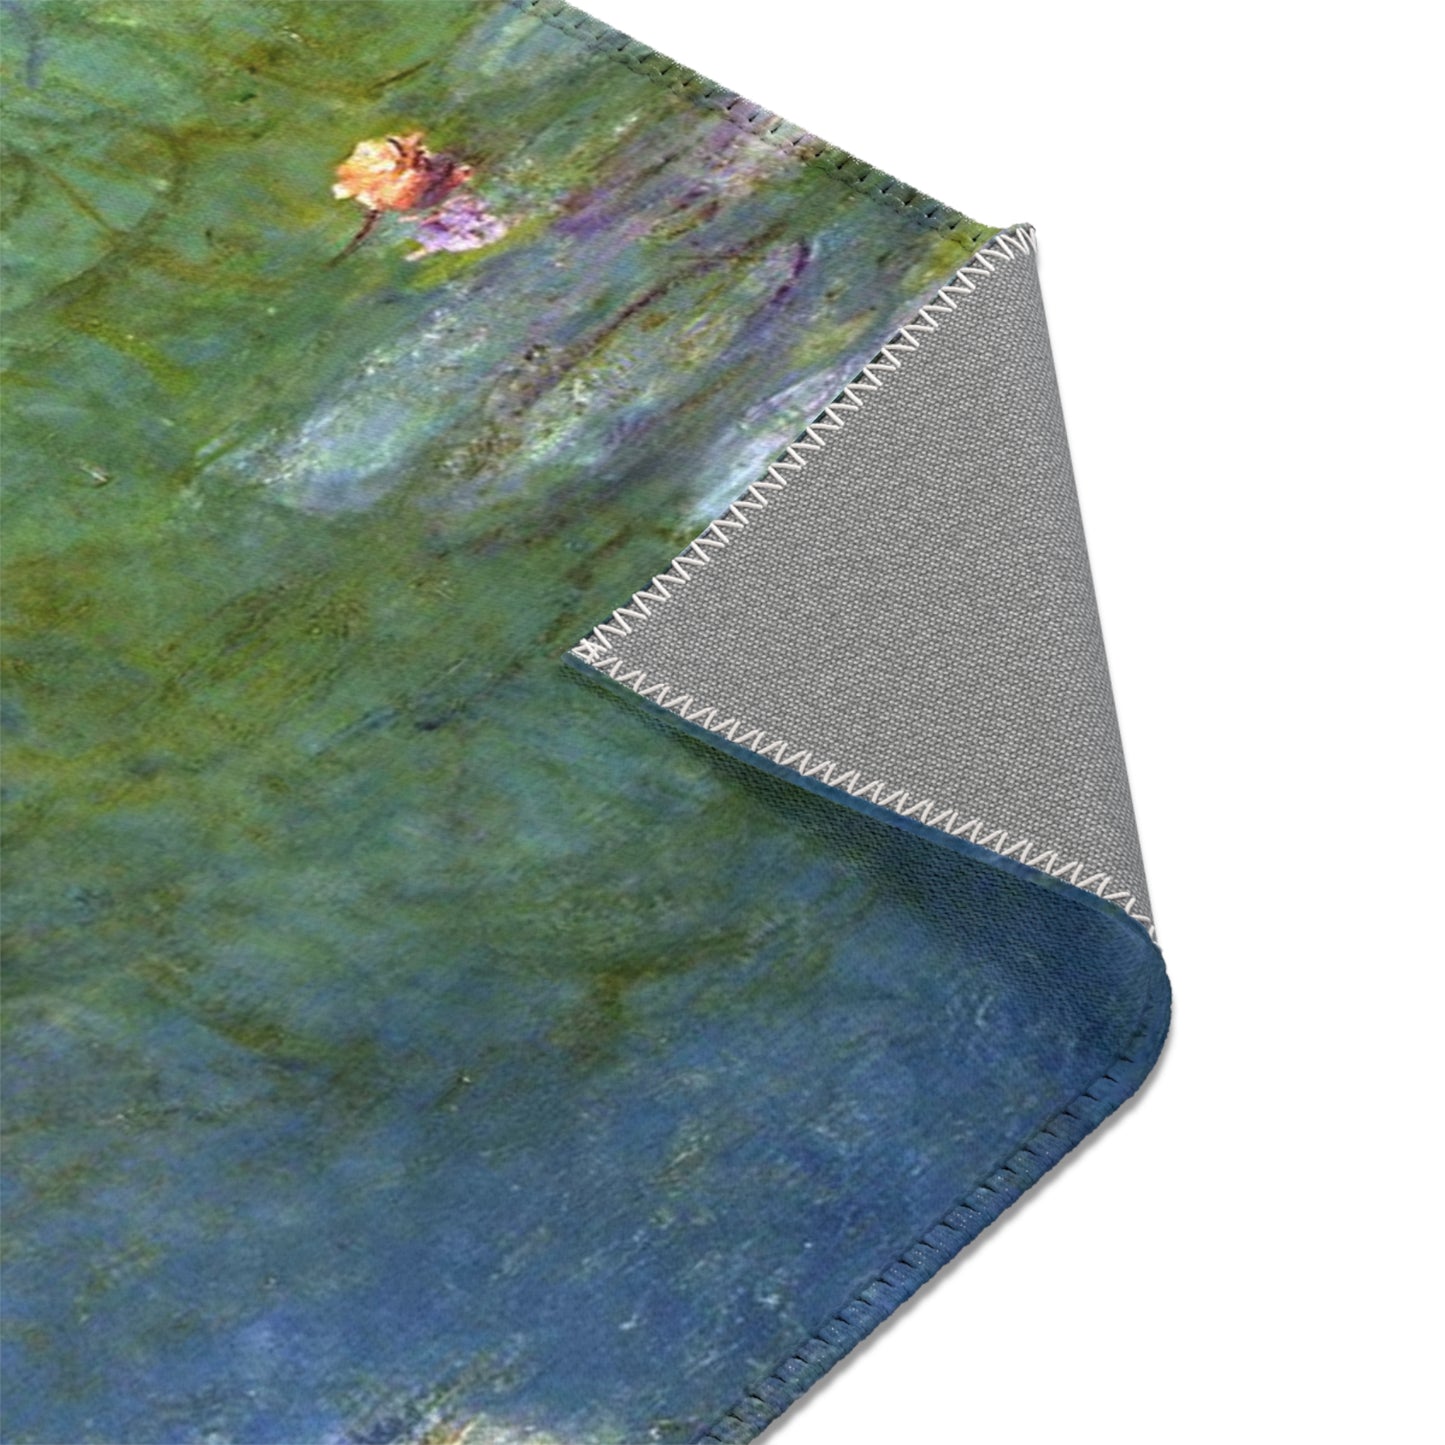 "Water Lilies" Area Rugs